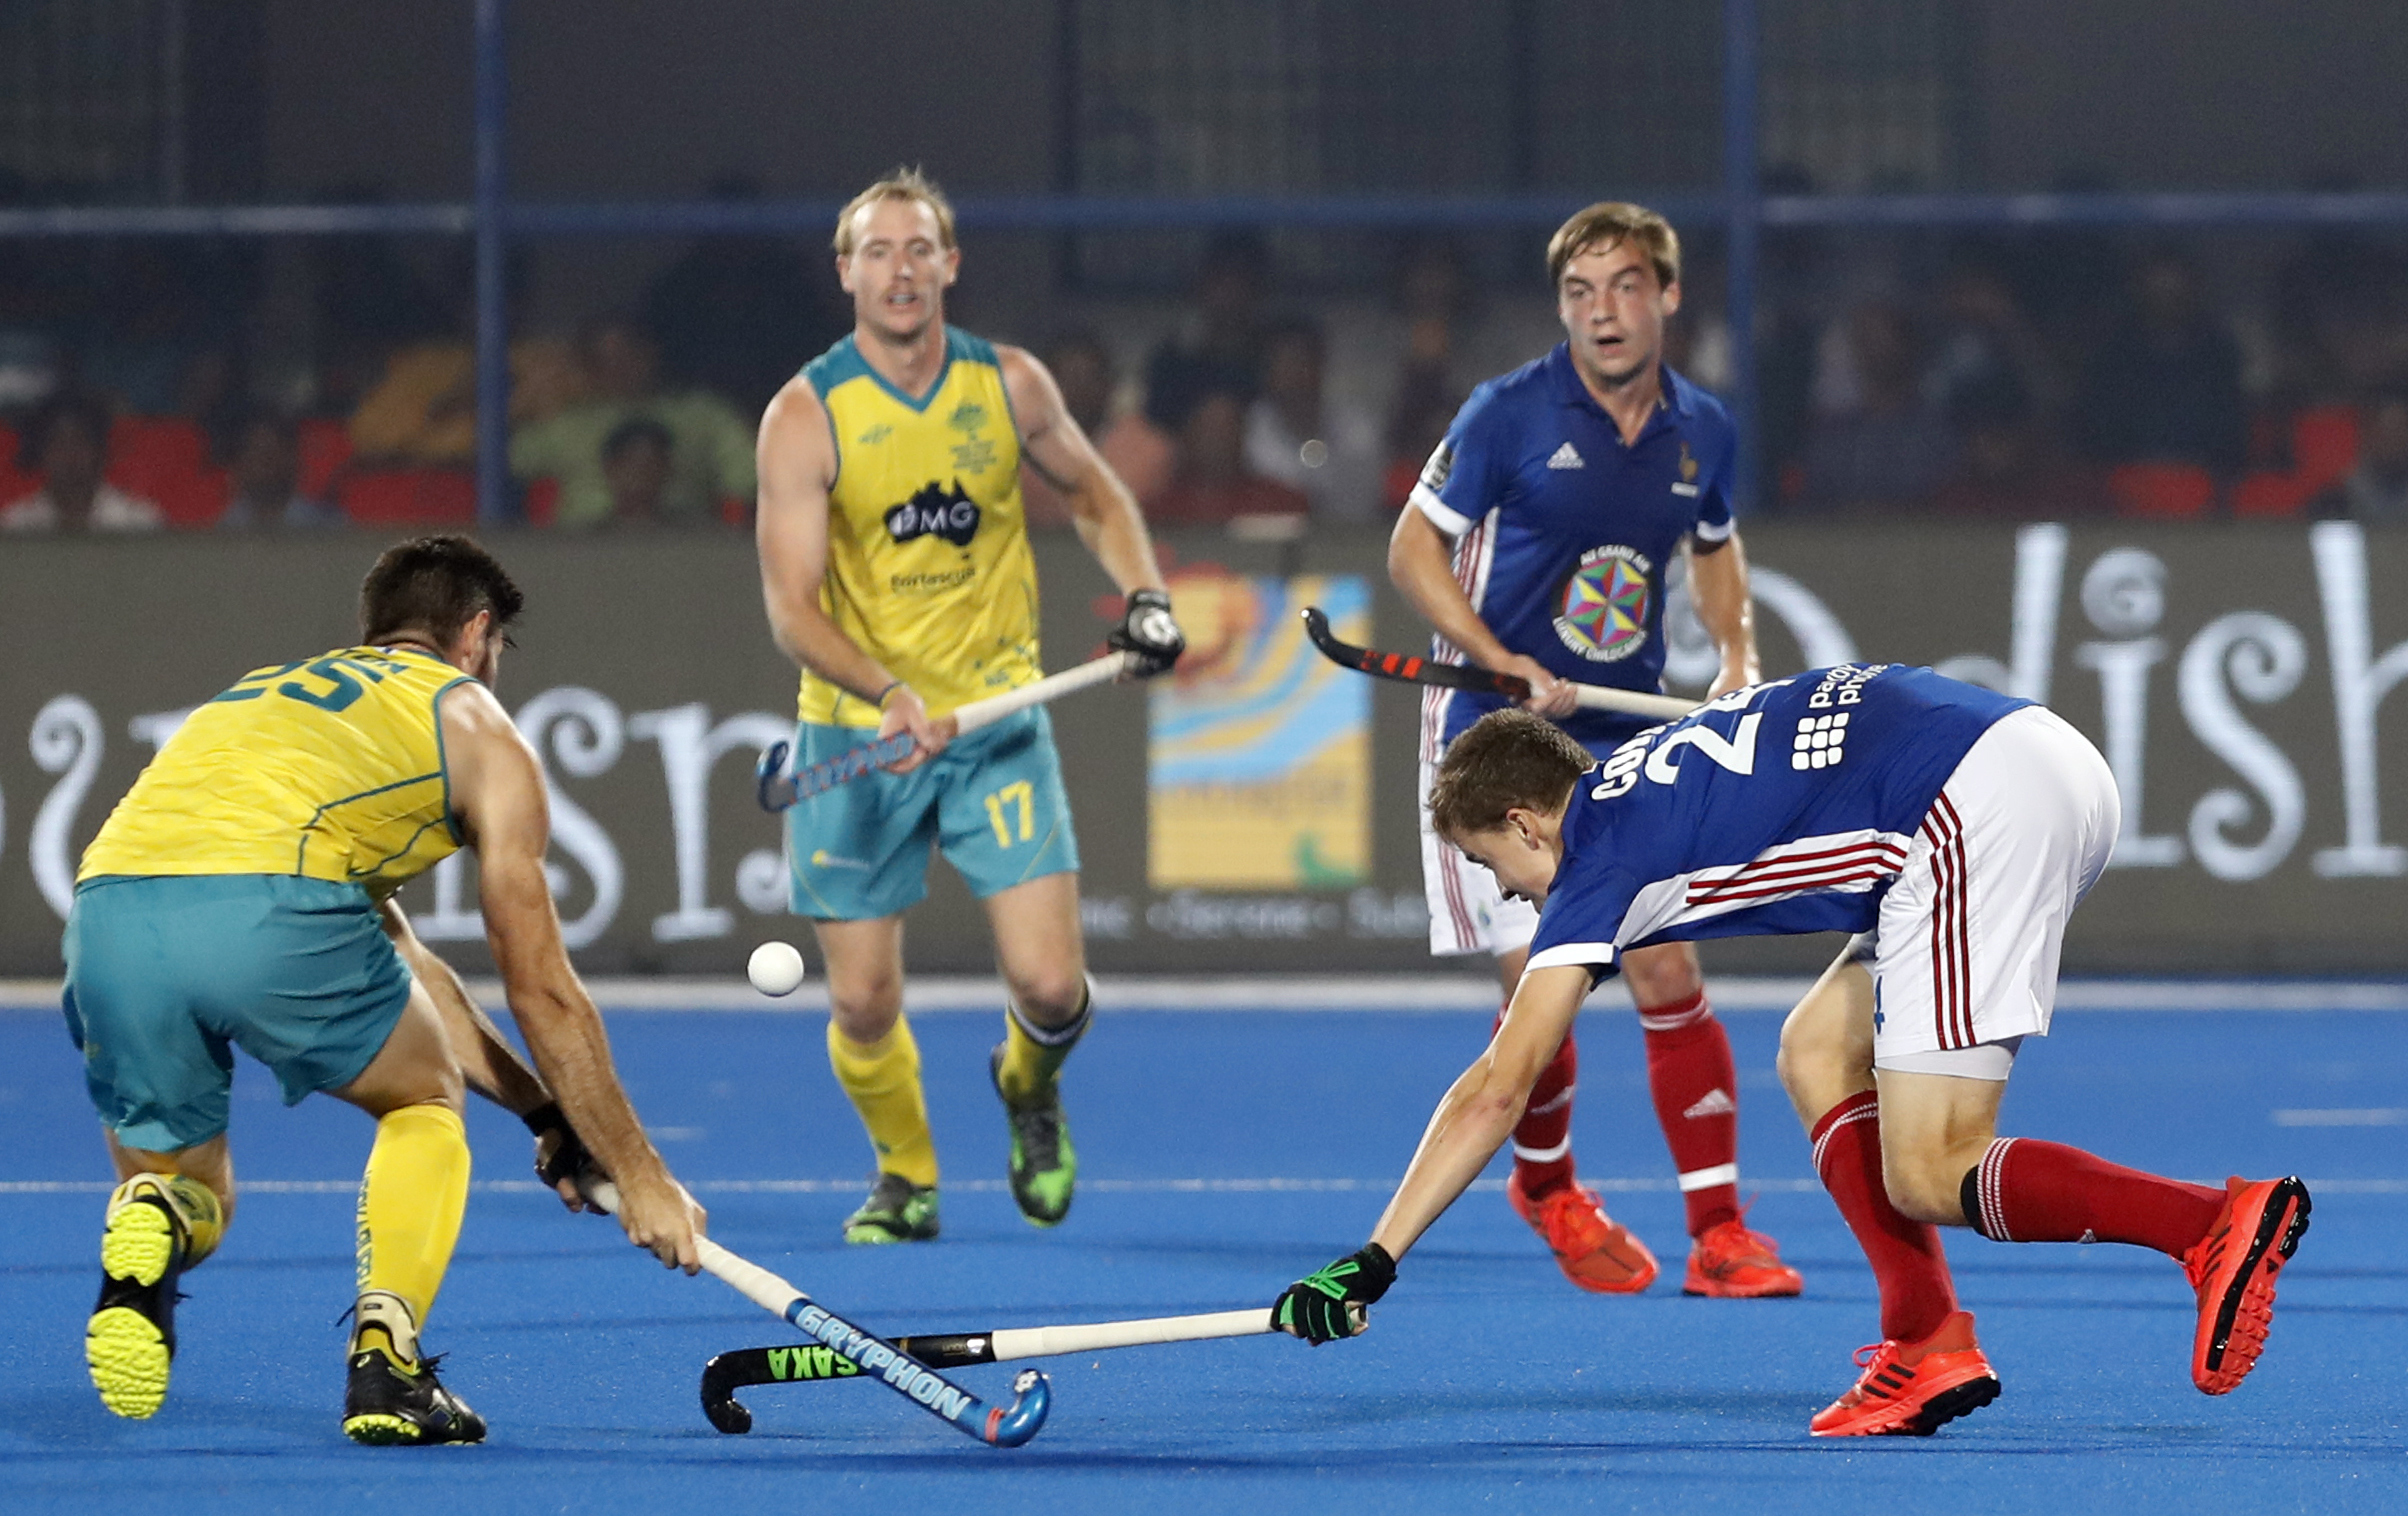 French and Australian players compete for the ball during the Men's Hockey World Cup quarterfinal match between France and Australia at the Kalinga Stadium in Bhubaneswar - AP